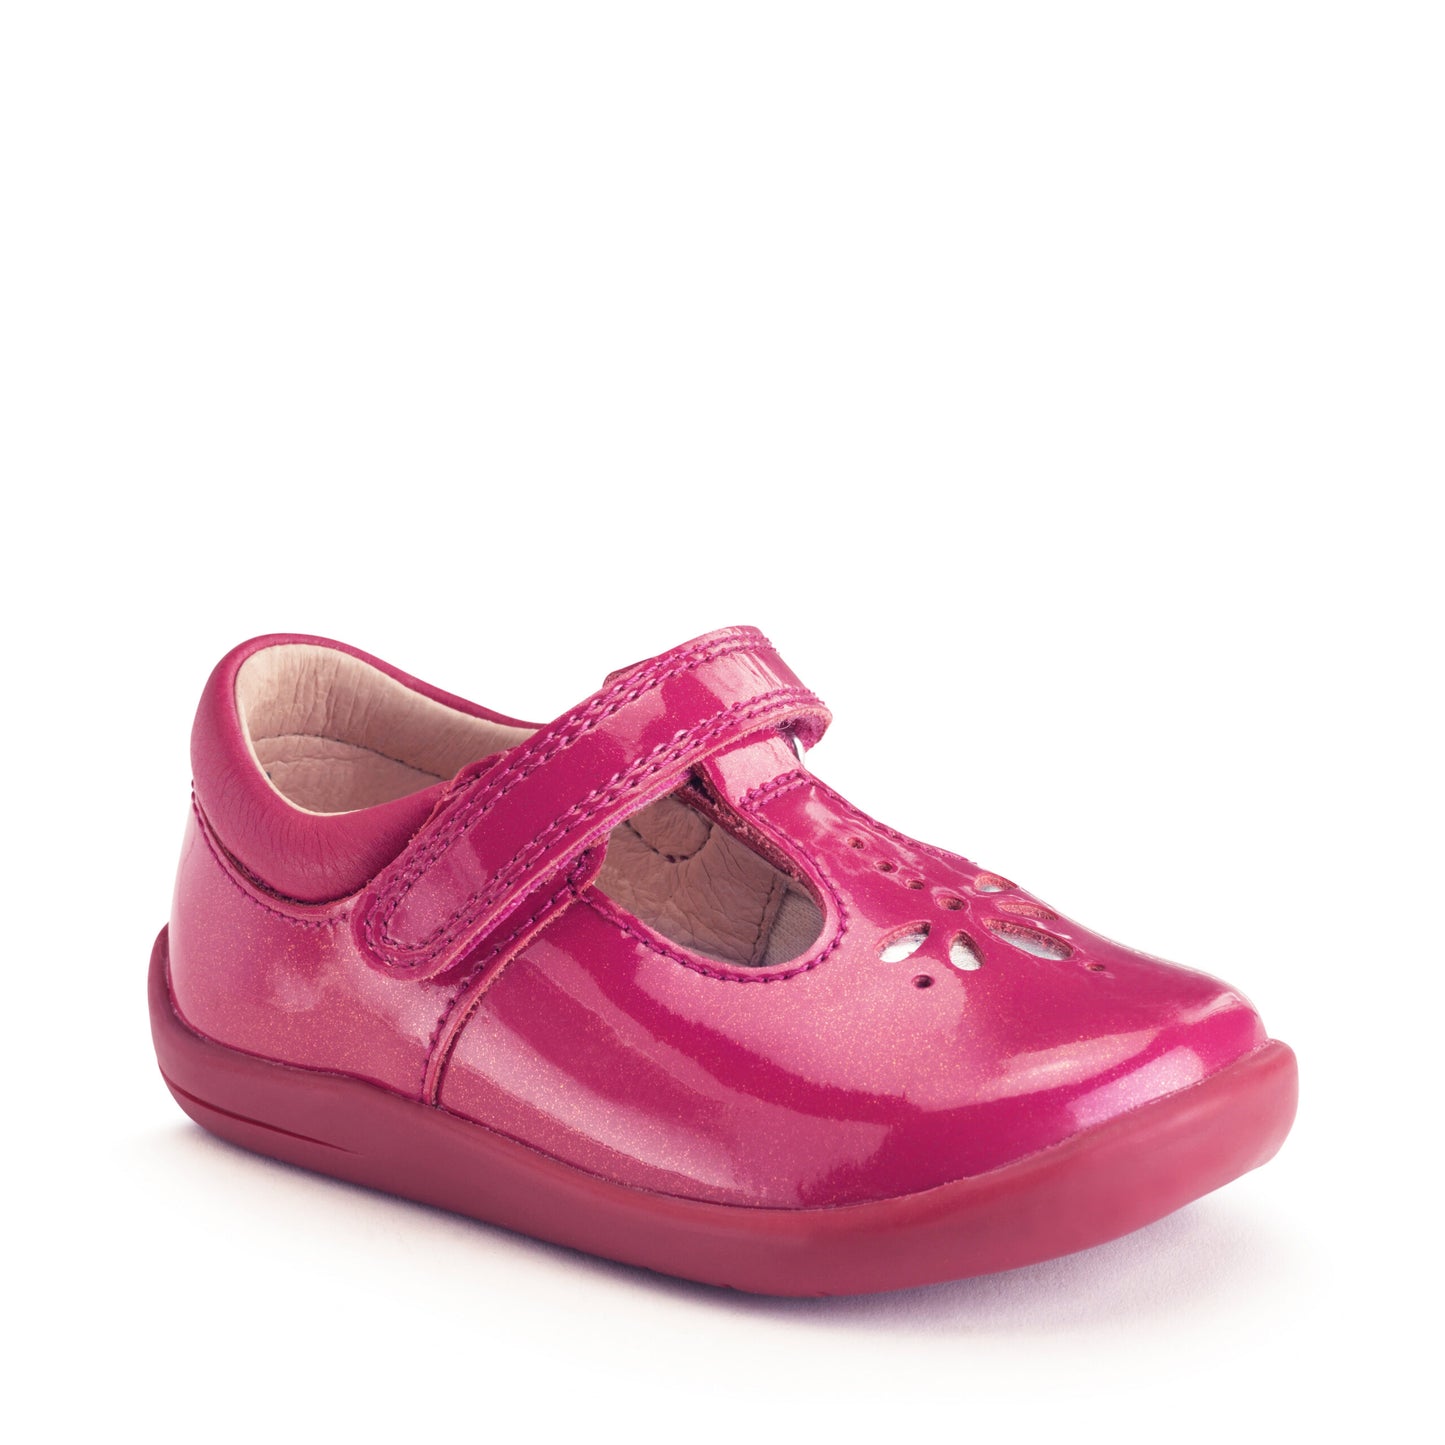 Puzzle Ruby Red Glitter Patent Girl's First Walking Shoe